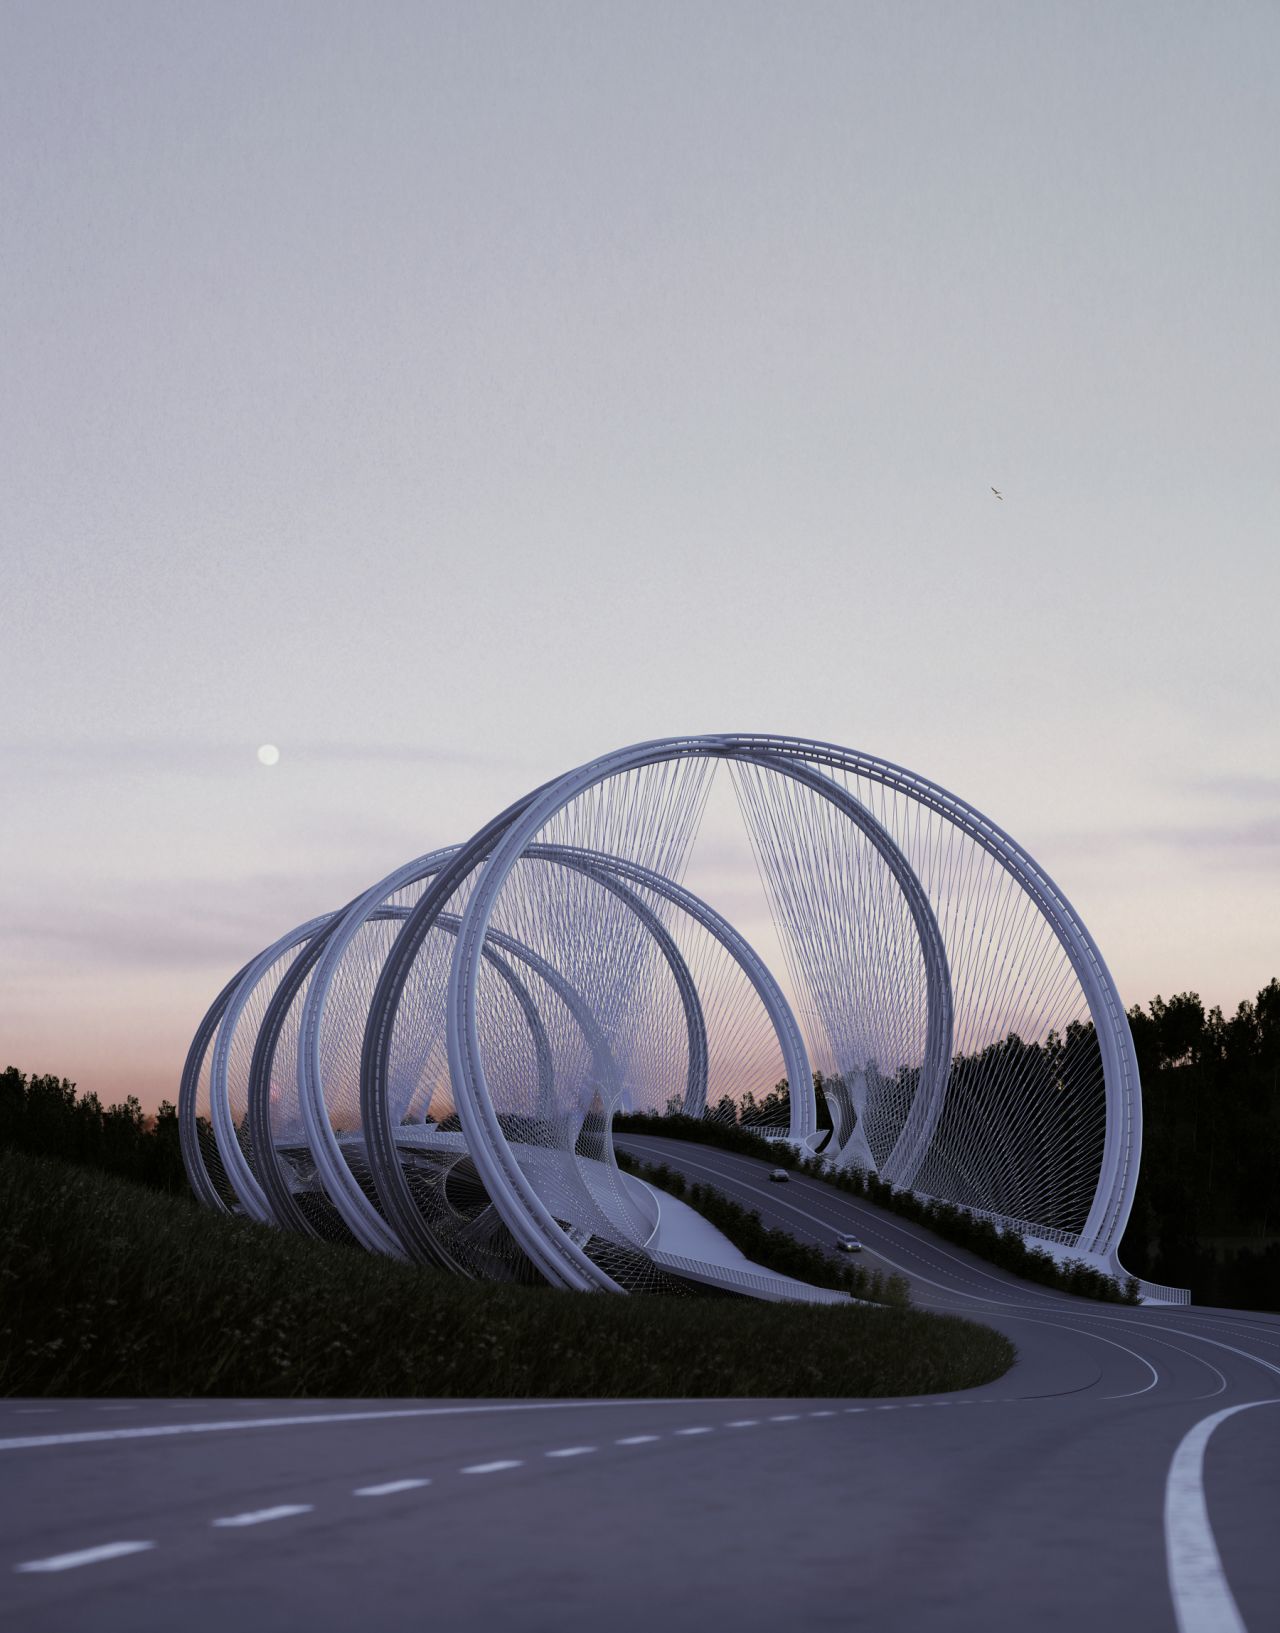 A collaborative project between Penda and engineering firm Arup, the bridge features multiple arches and was partly inspired by the famous five-ringed symbol of the Olympic Games. 